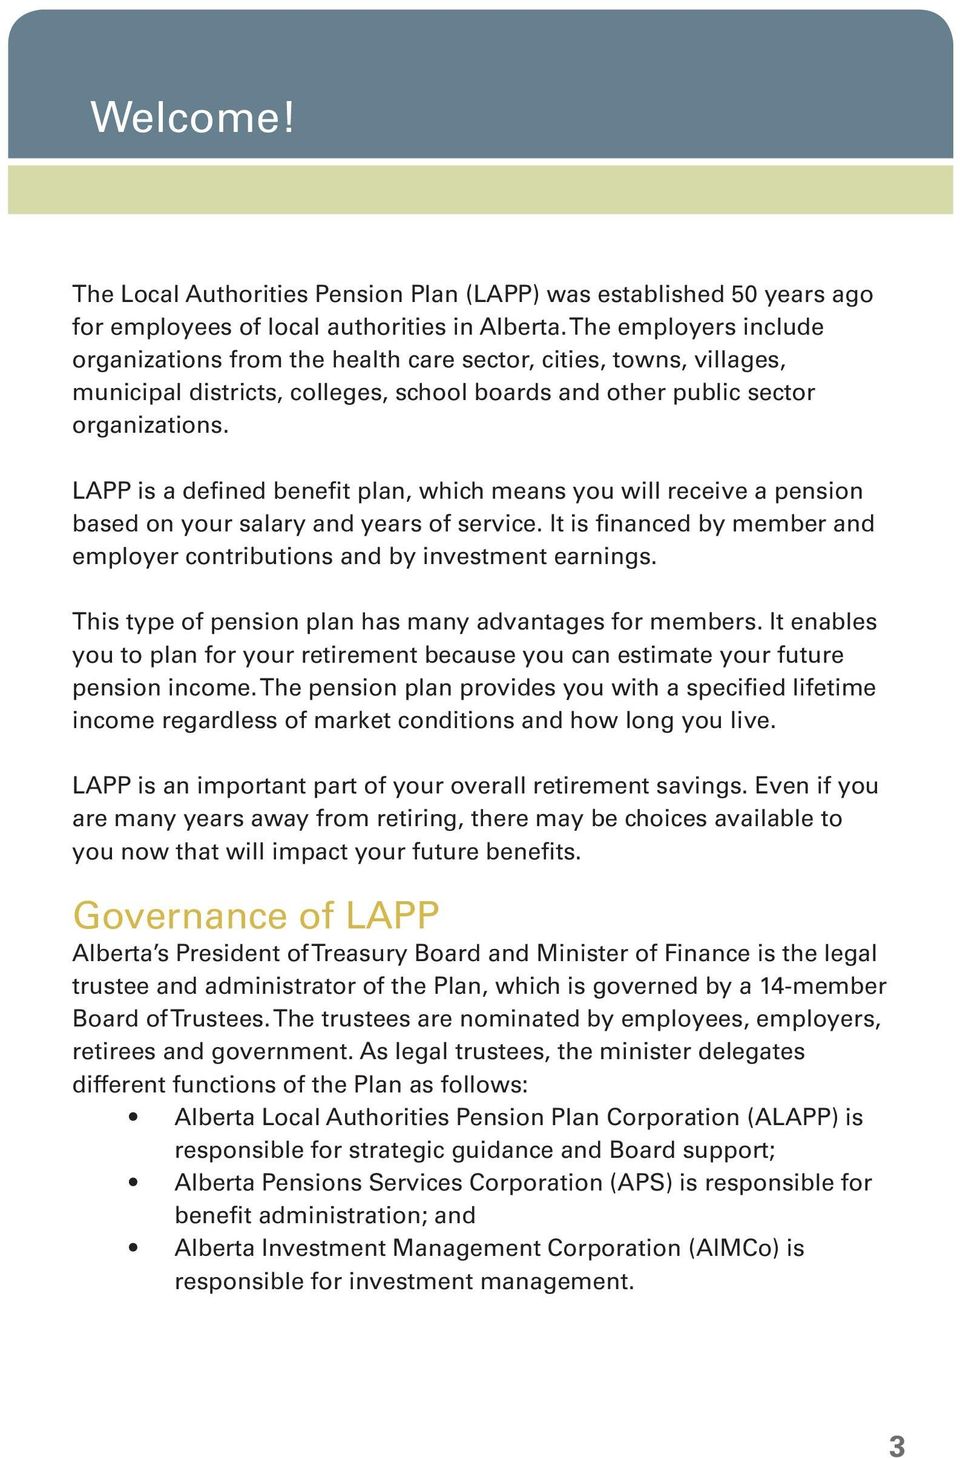 LAPP is a defined benefit plan, which means you will receive a pension based on your salary and years of service. It is financed by member and employer contributions and by investment earnings.